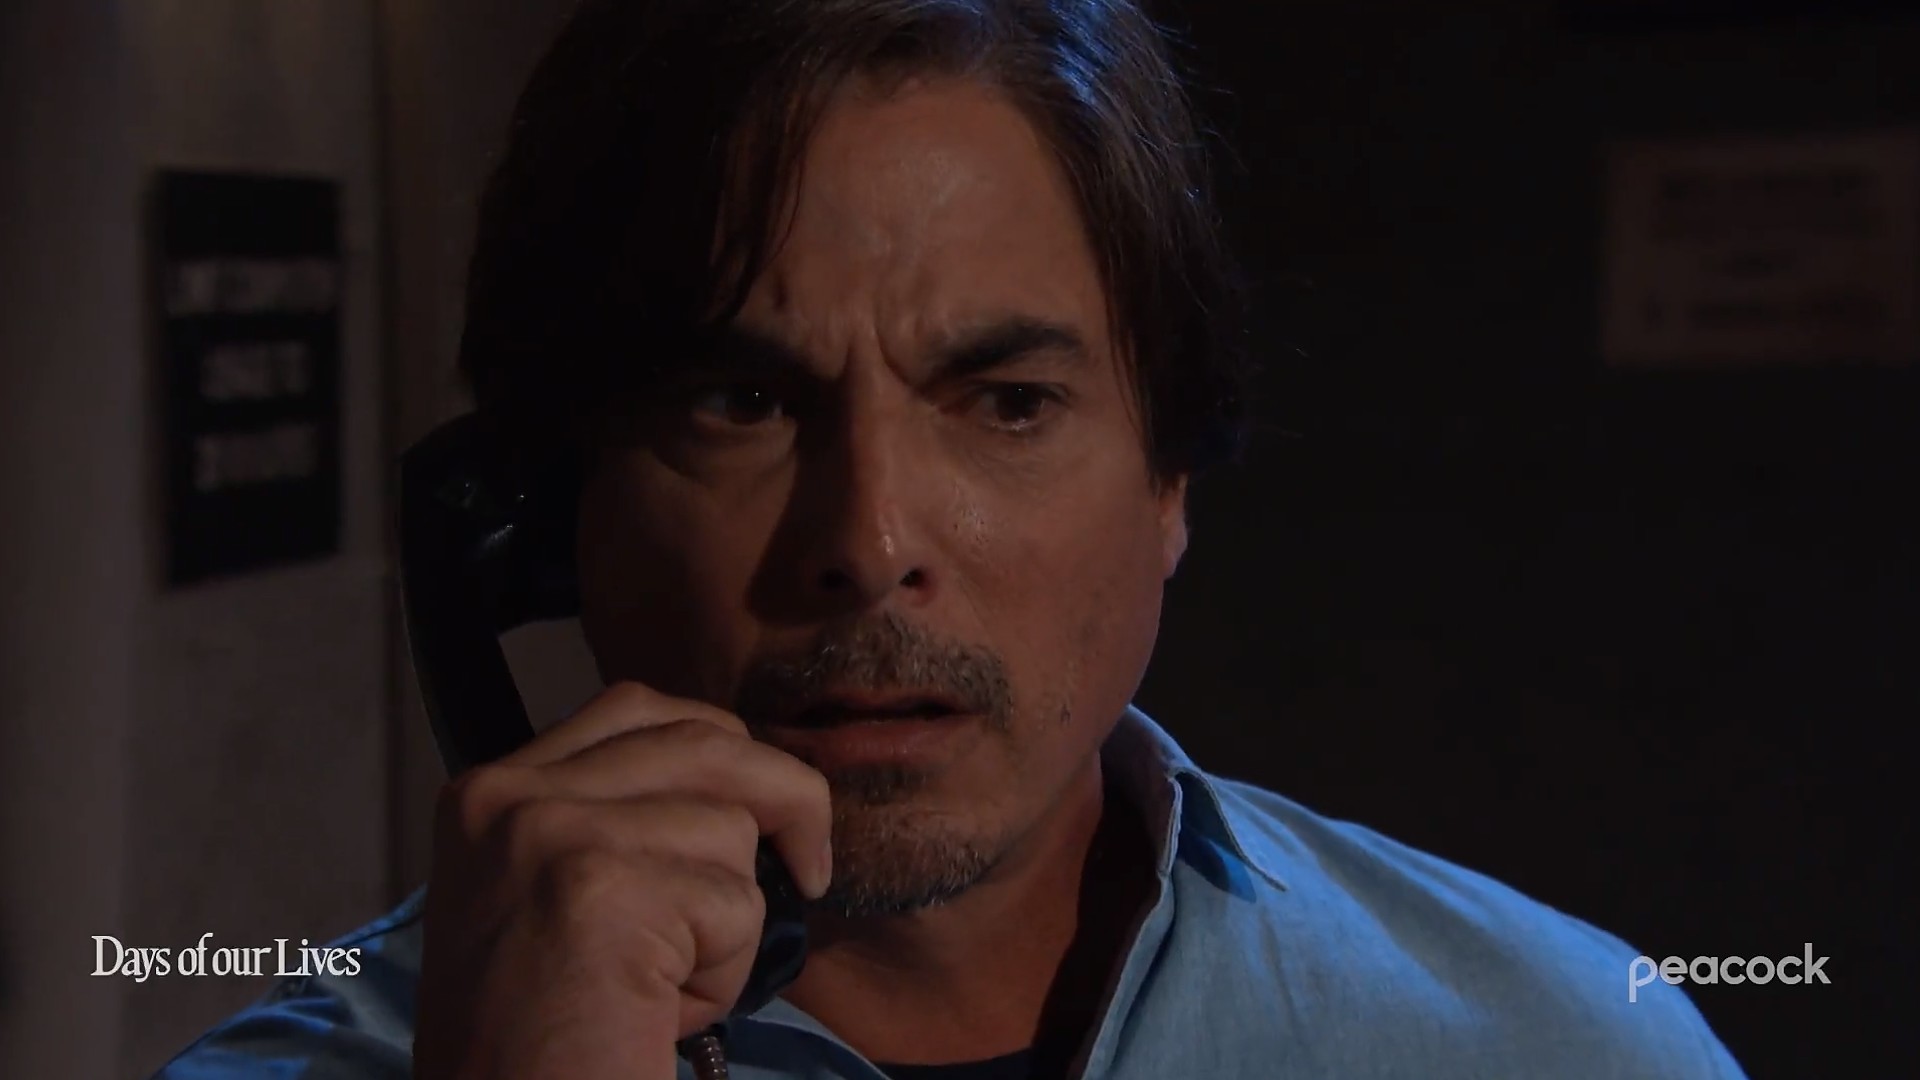 DOOL/Lucas (Bryan Dattilo) gets devastating news about his mother passing